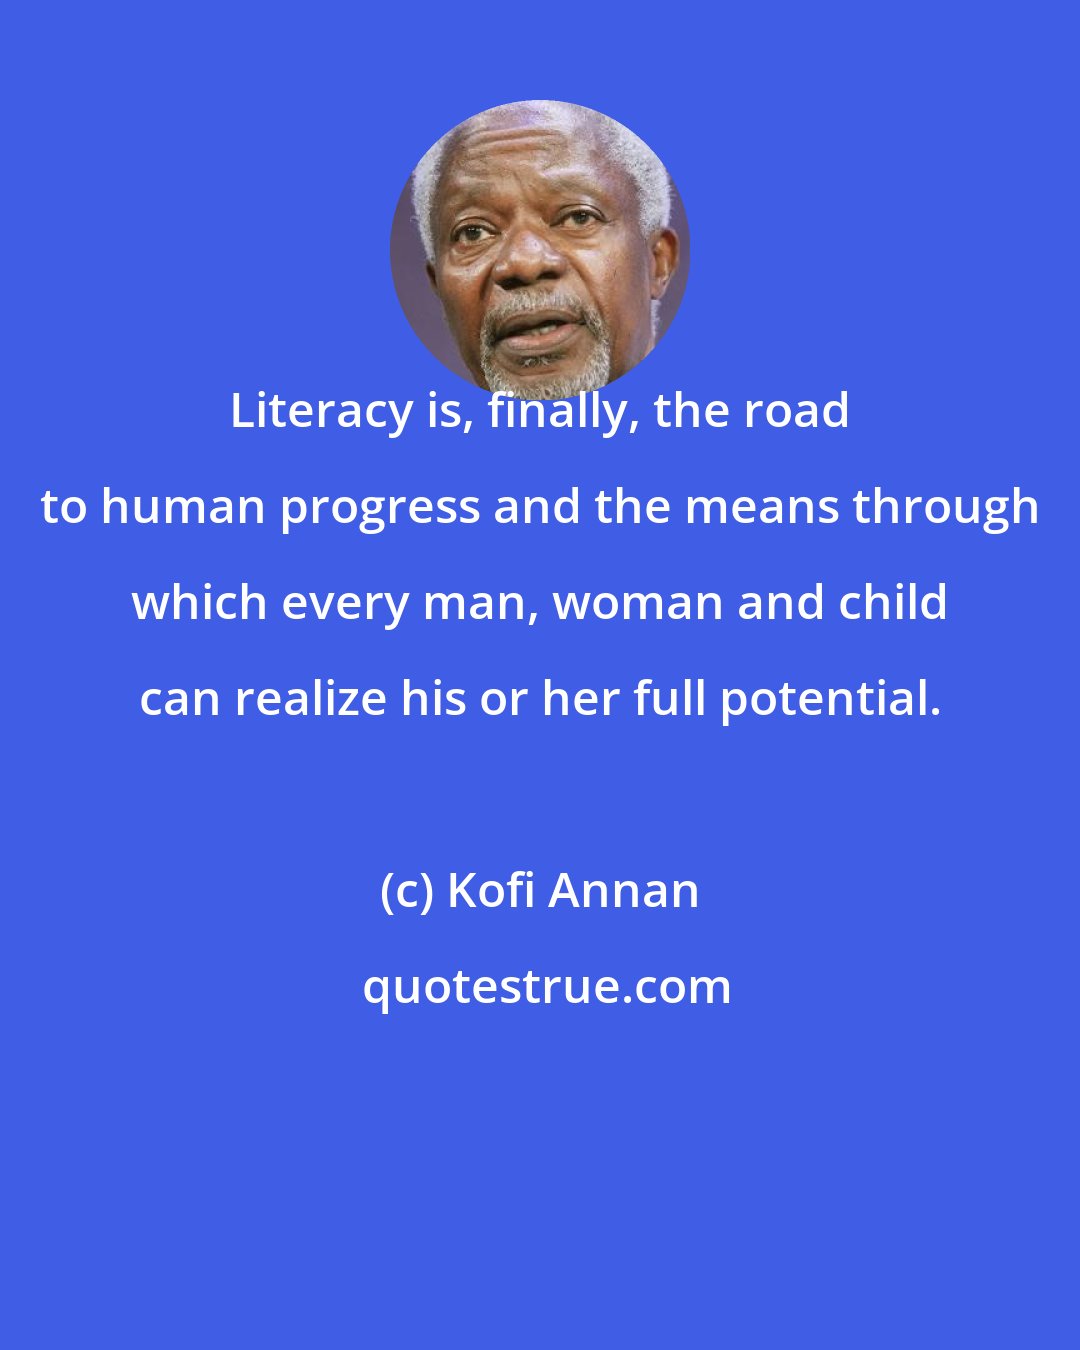 Kofi Annan: Literacy is, finally, the road to human progress and the means through which every man, woman and child can realize his or her full potential.